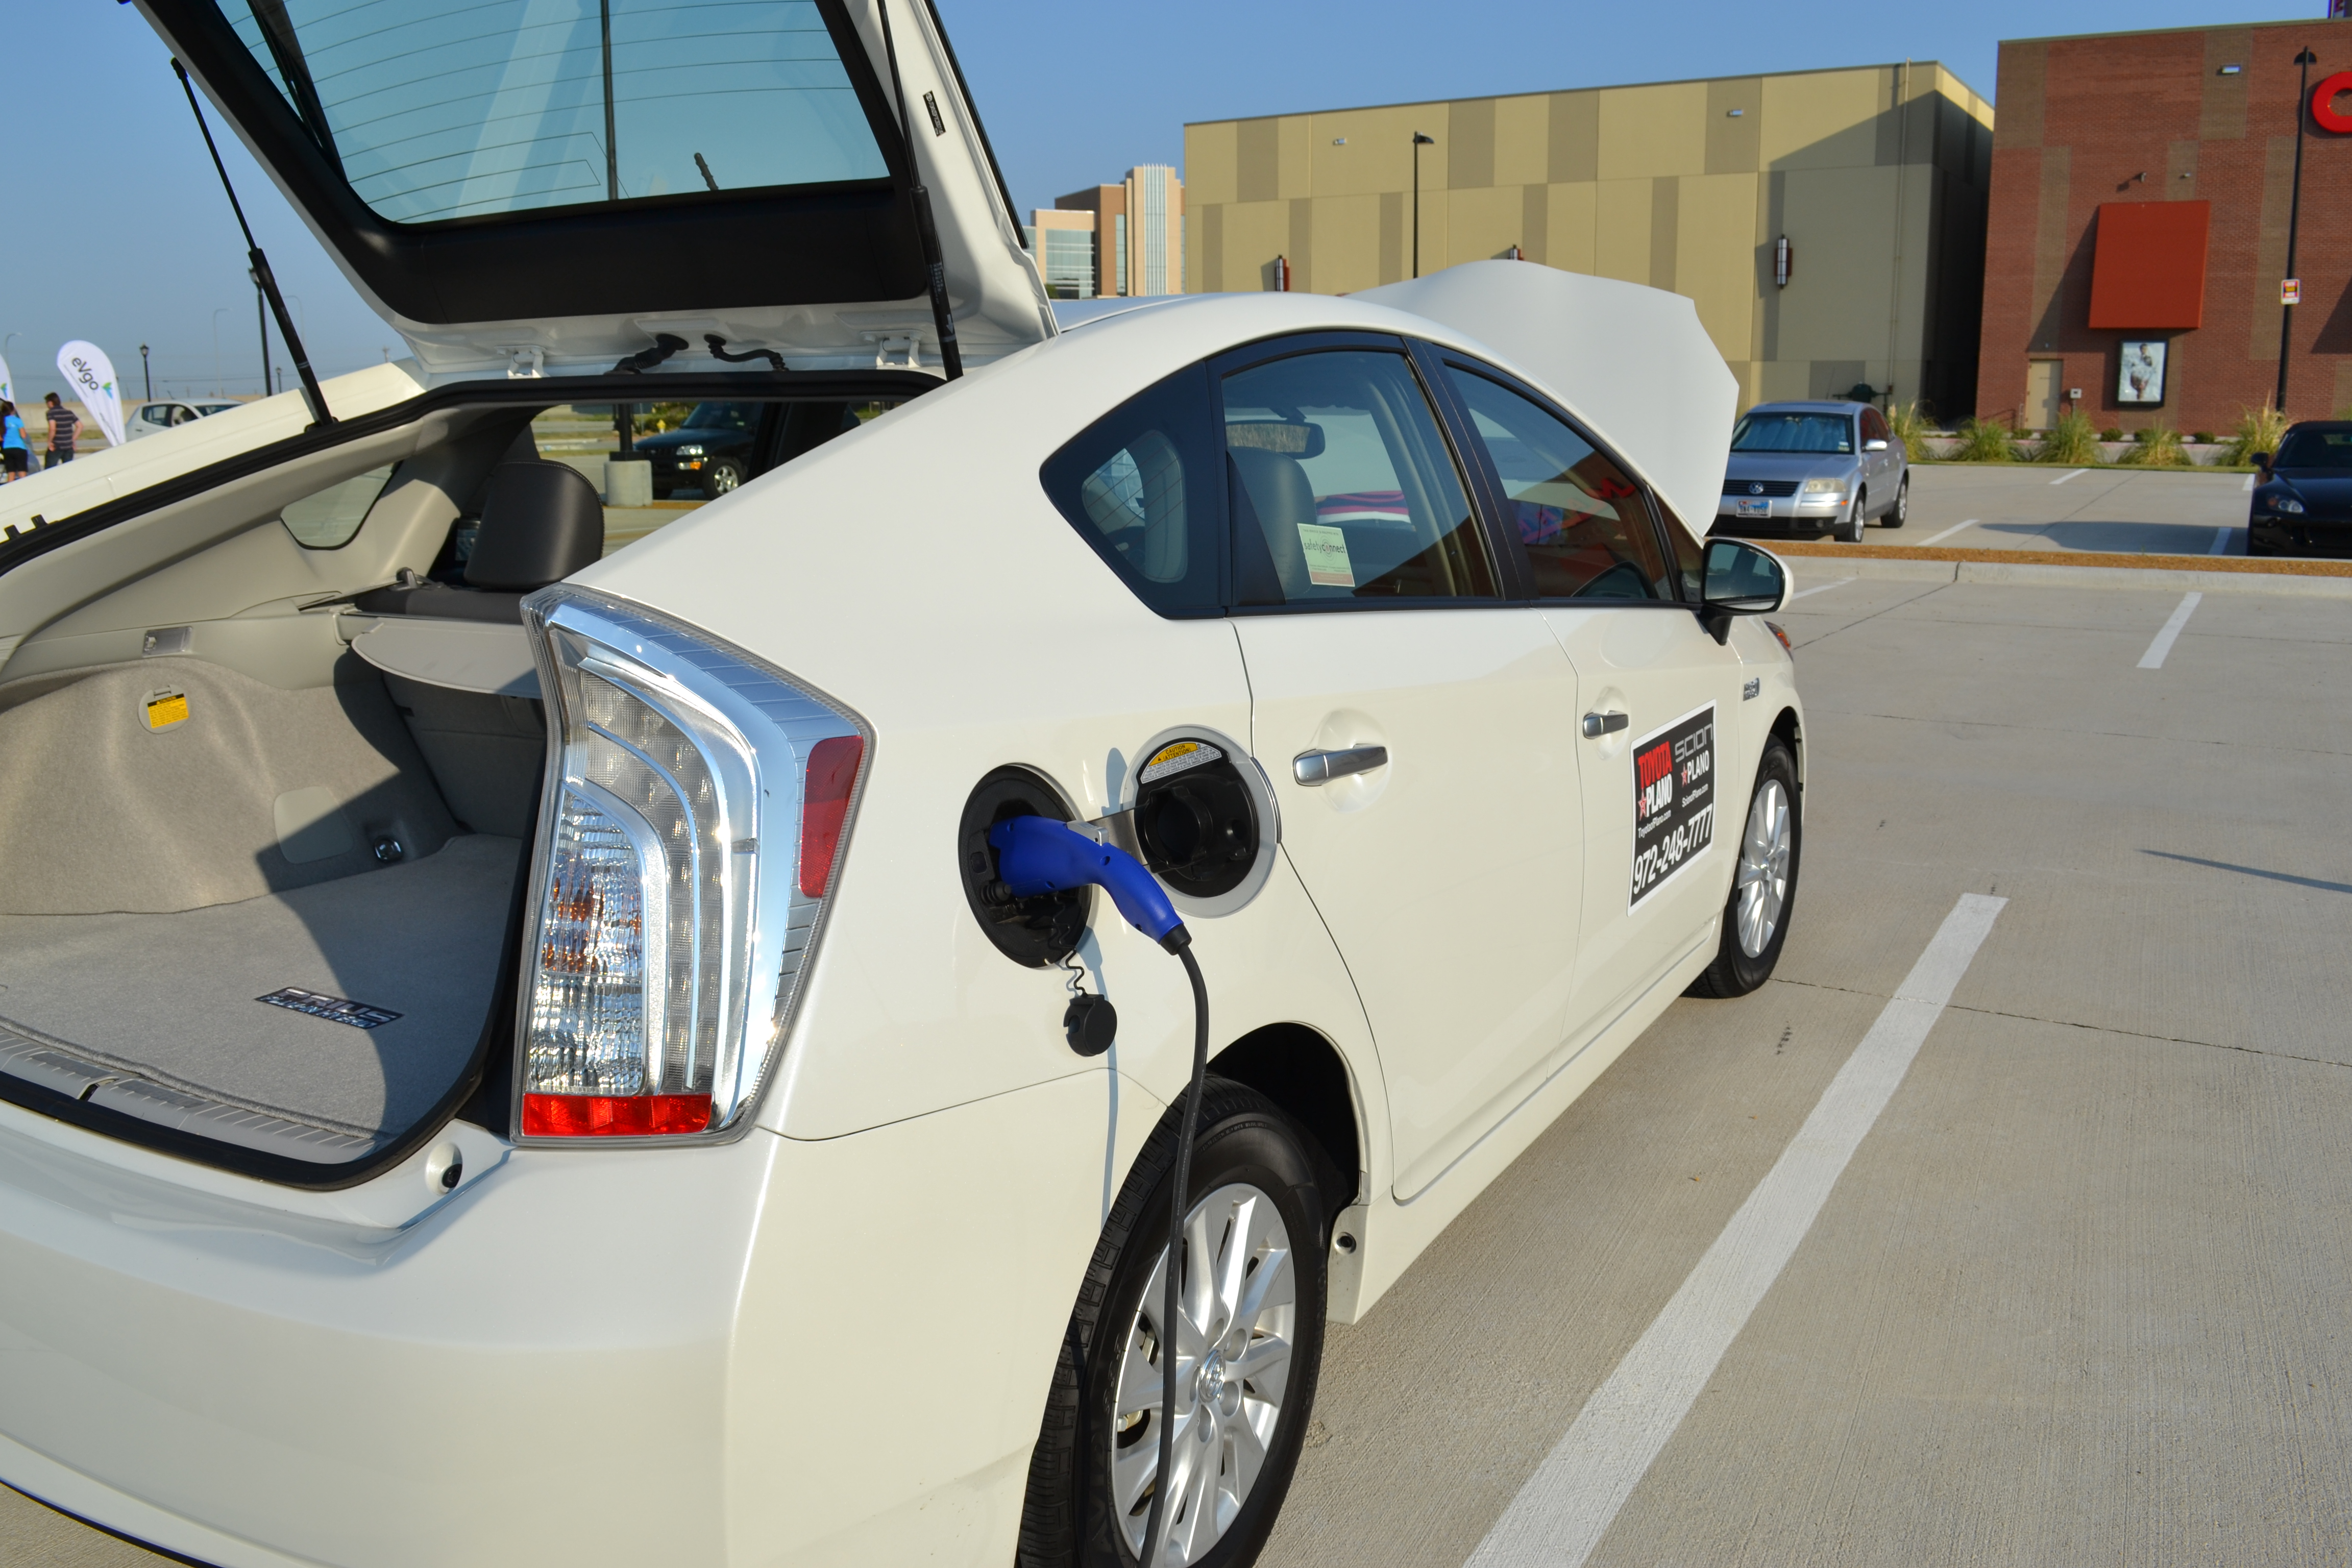 National Plug In Day event planned in Dallas on Sept. 28